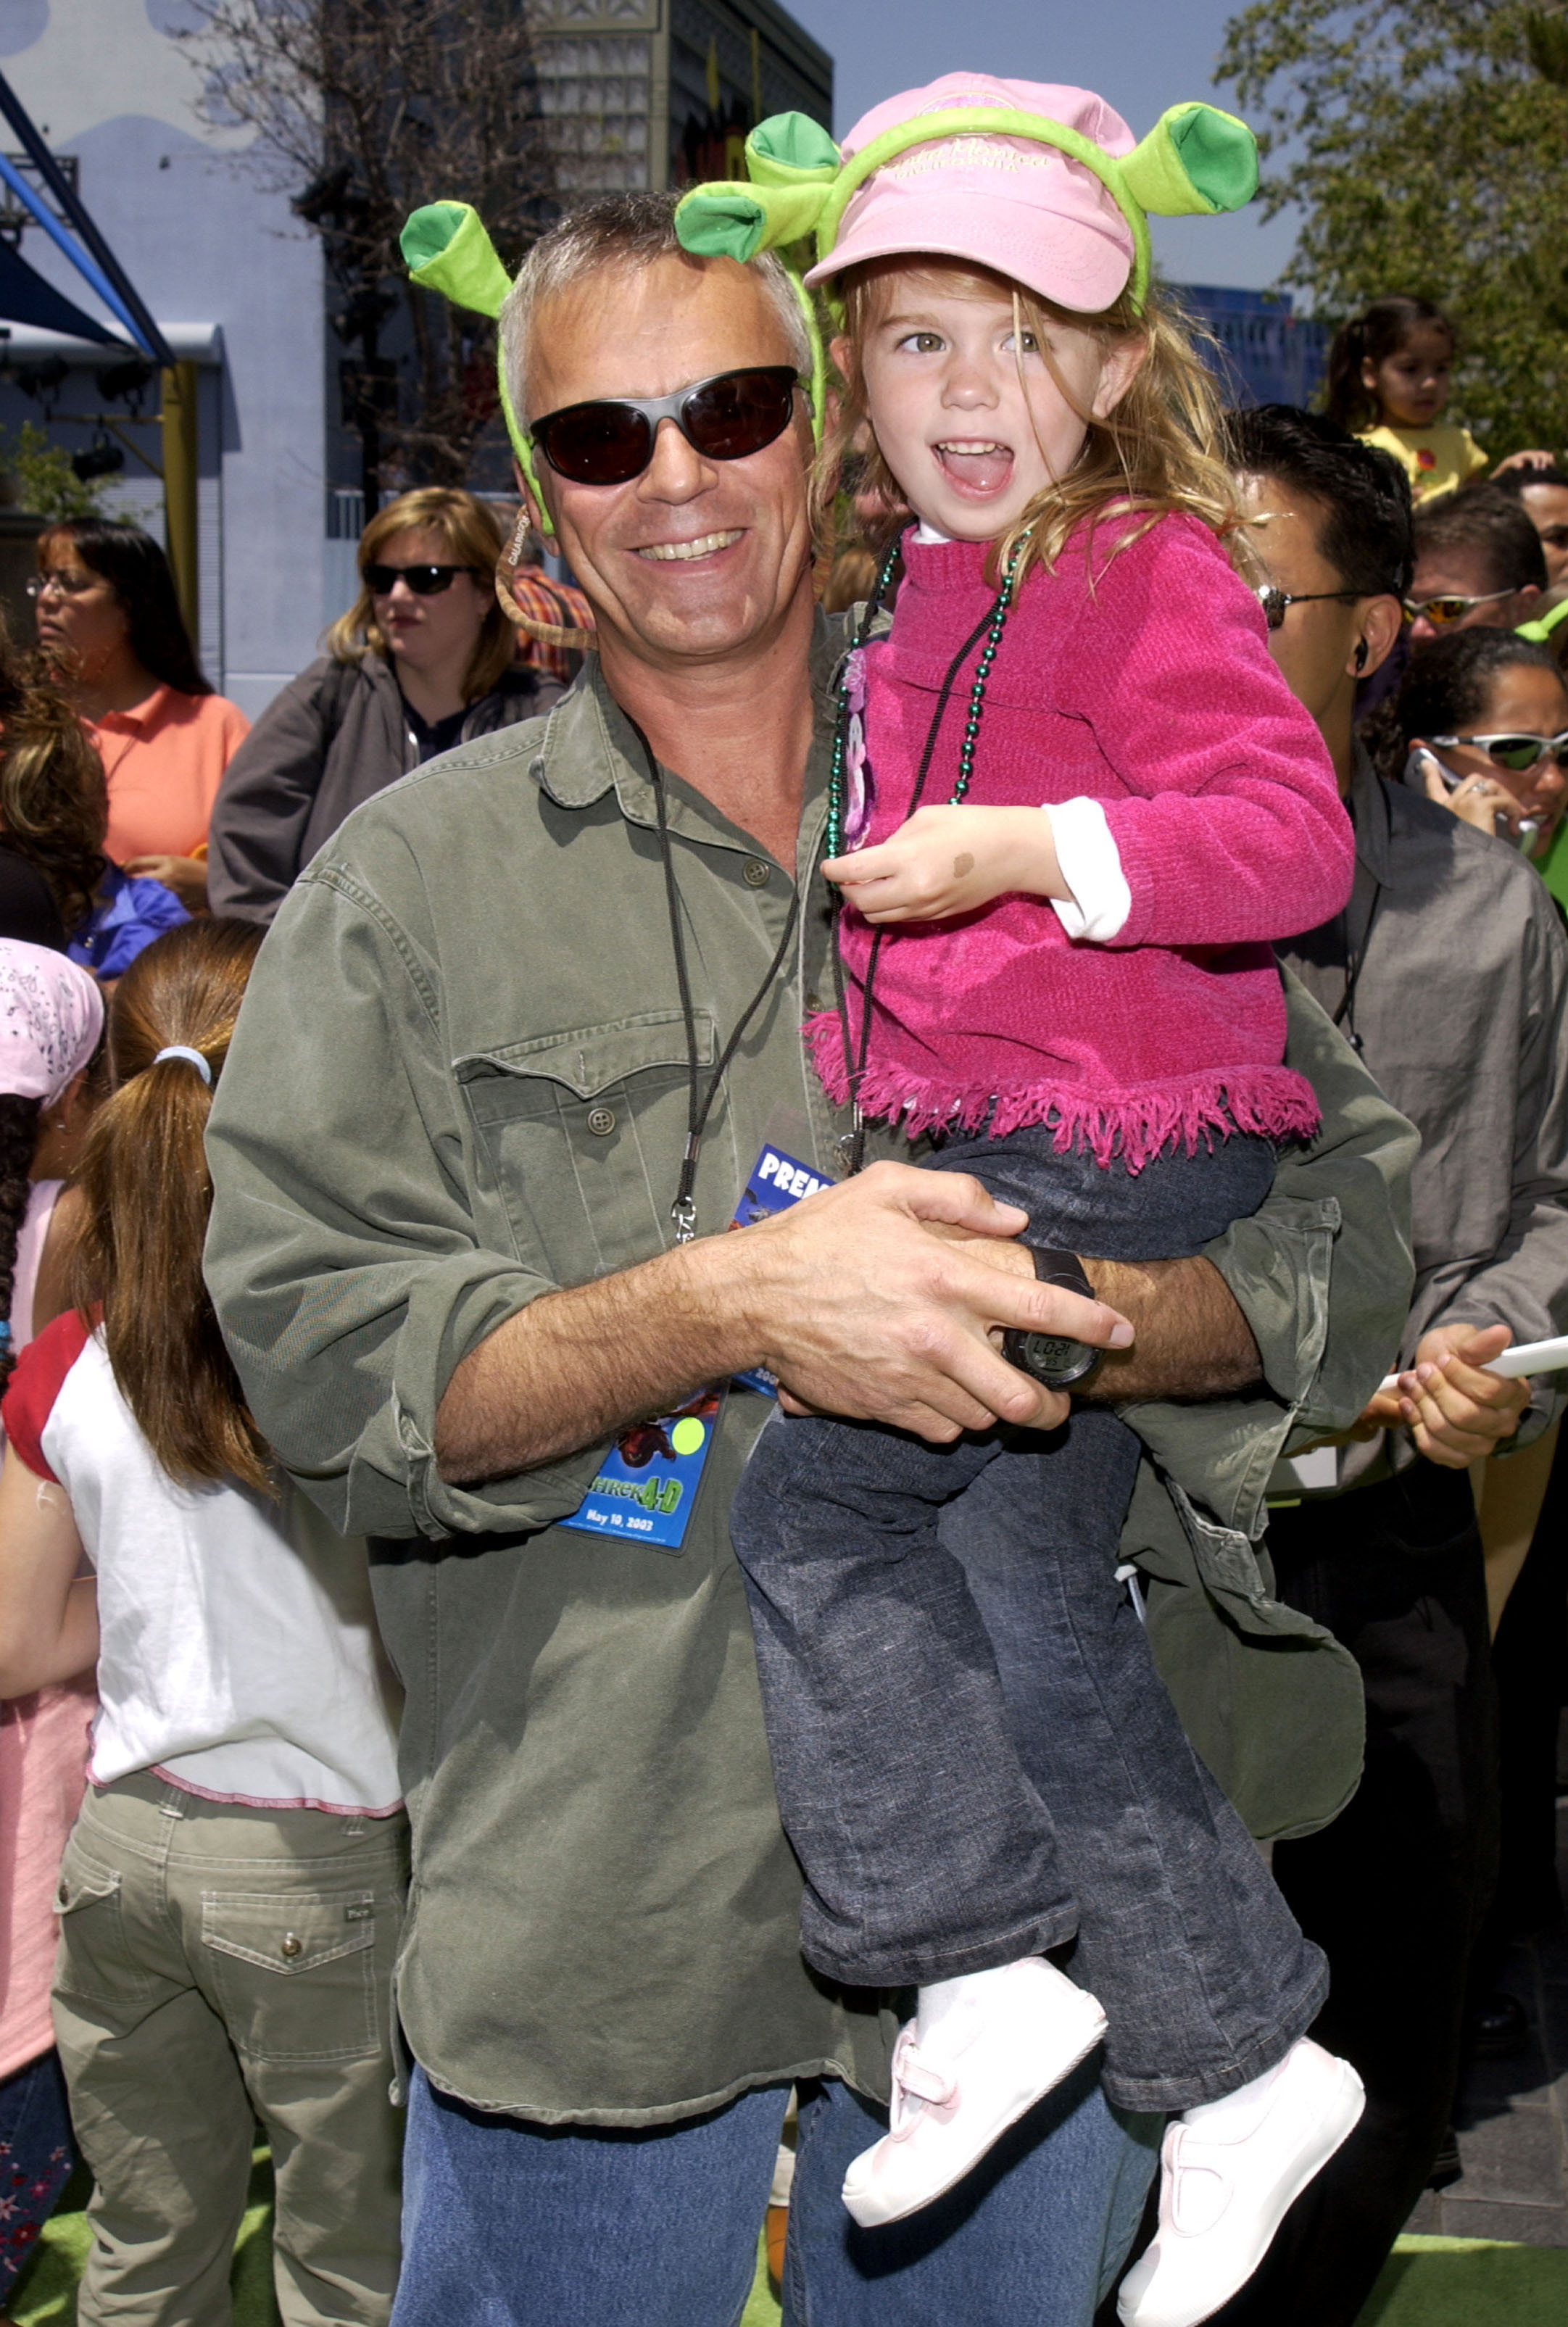 Richard Dean Anderson and his daughter during the premiere of "Shrek 4-D" in Universal City, California, on May 10, 2003 | Source: Getty Images